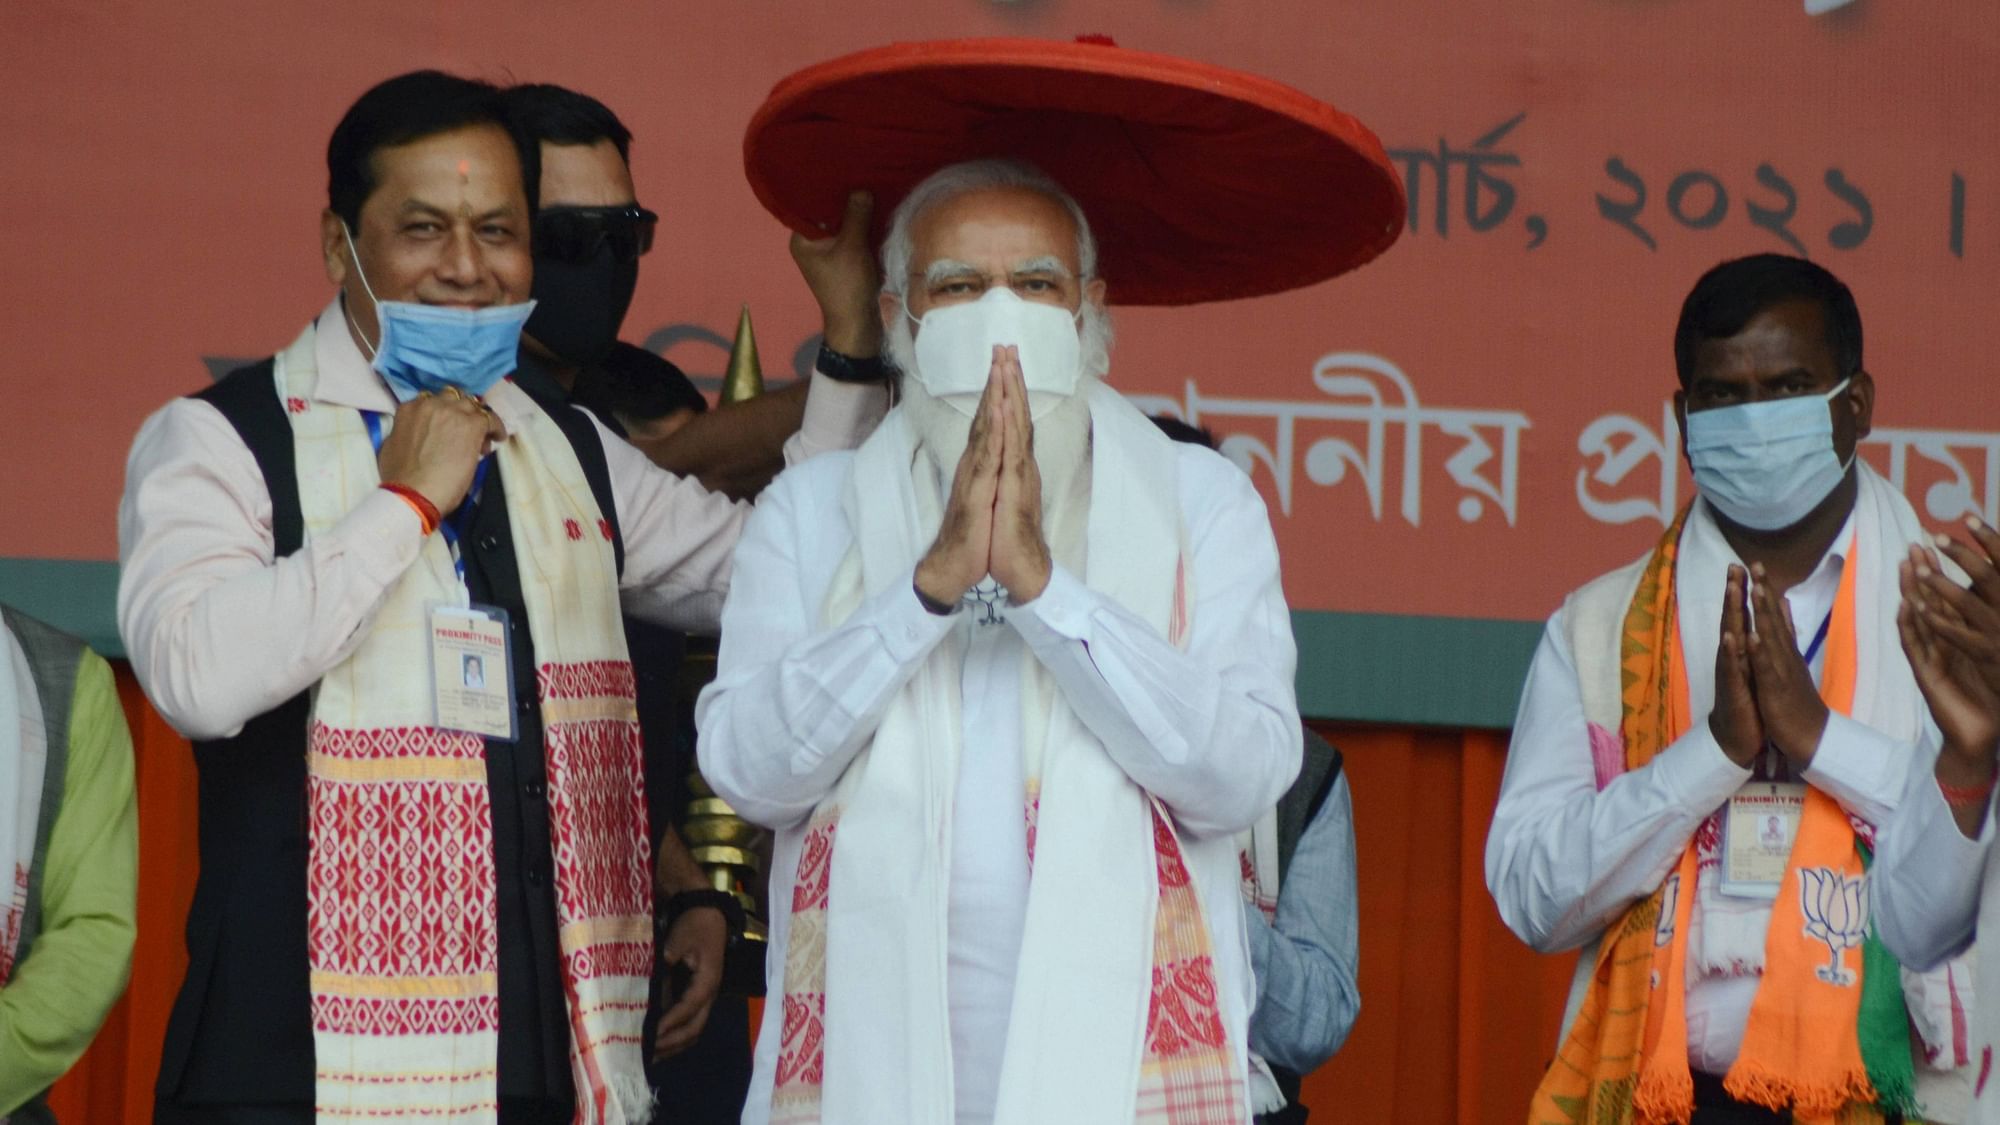 Tinsukia: Prime Minister Narendra Modi being presented an Assamese Japi by Assam Chief Minister Sarbananda Sonowal during a public rally ahead of Assam Assembly polls, in Tinsukia on Saturday, 20 March 2021.